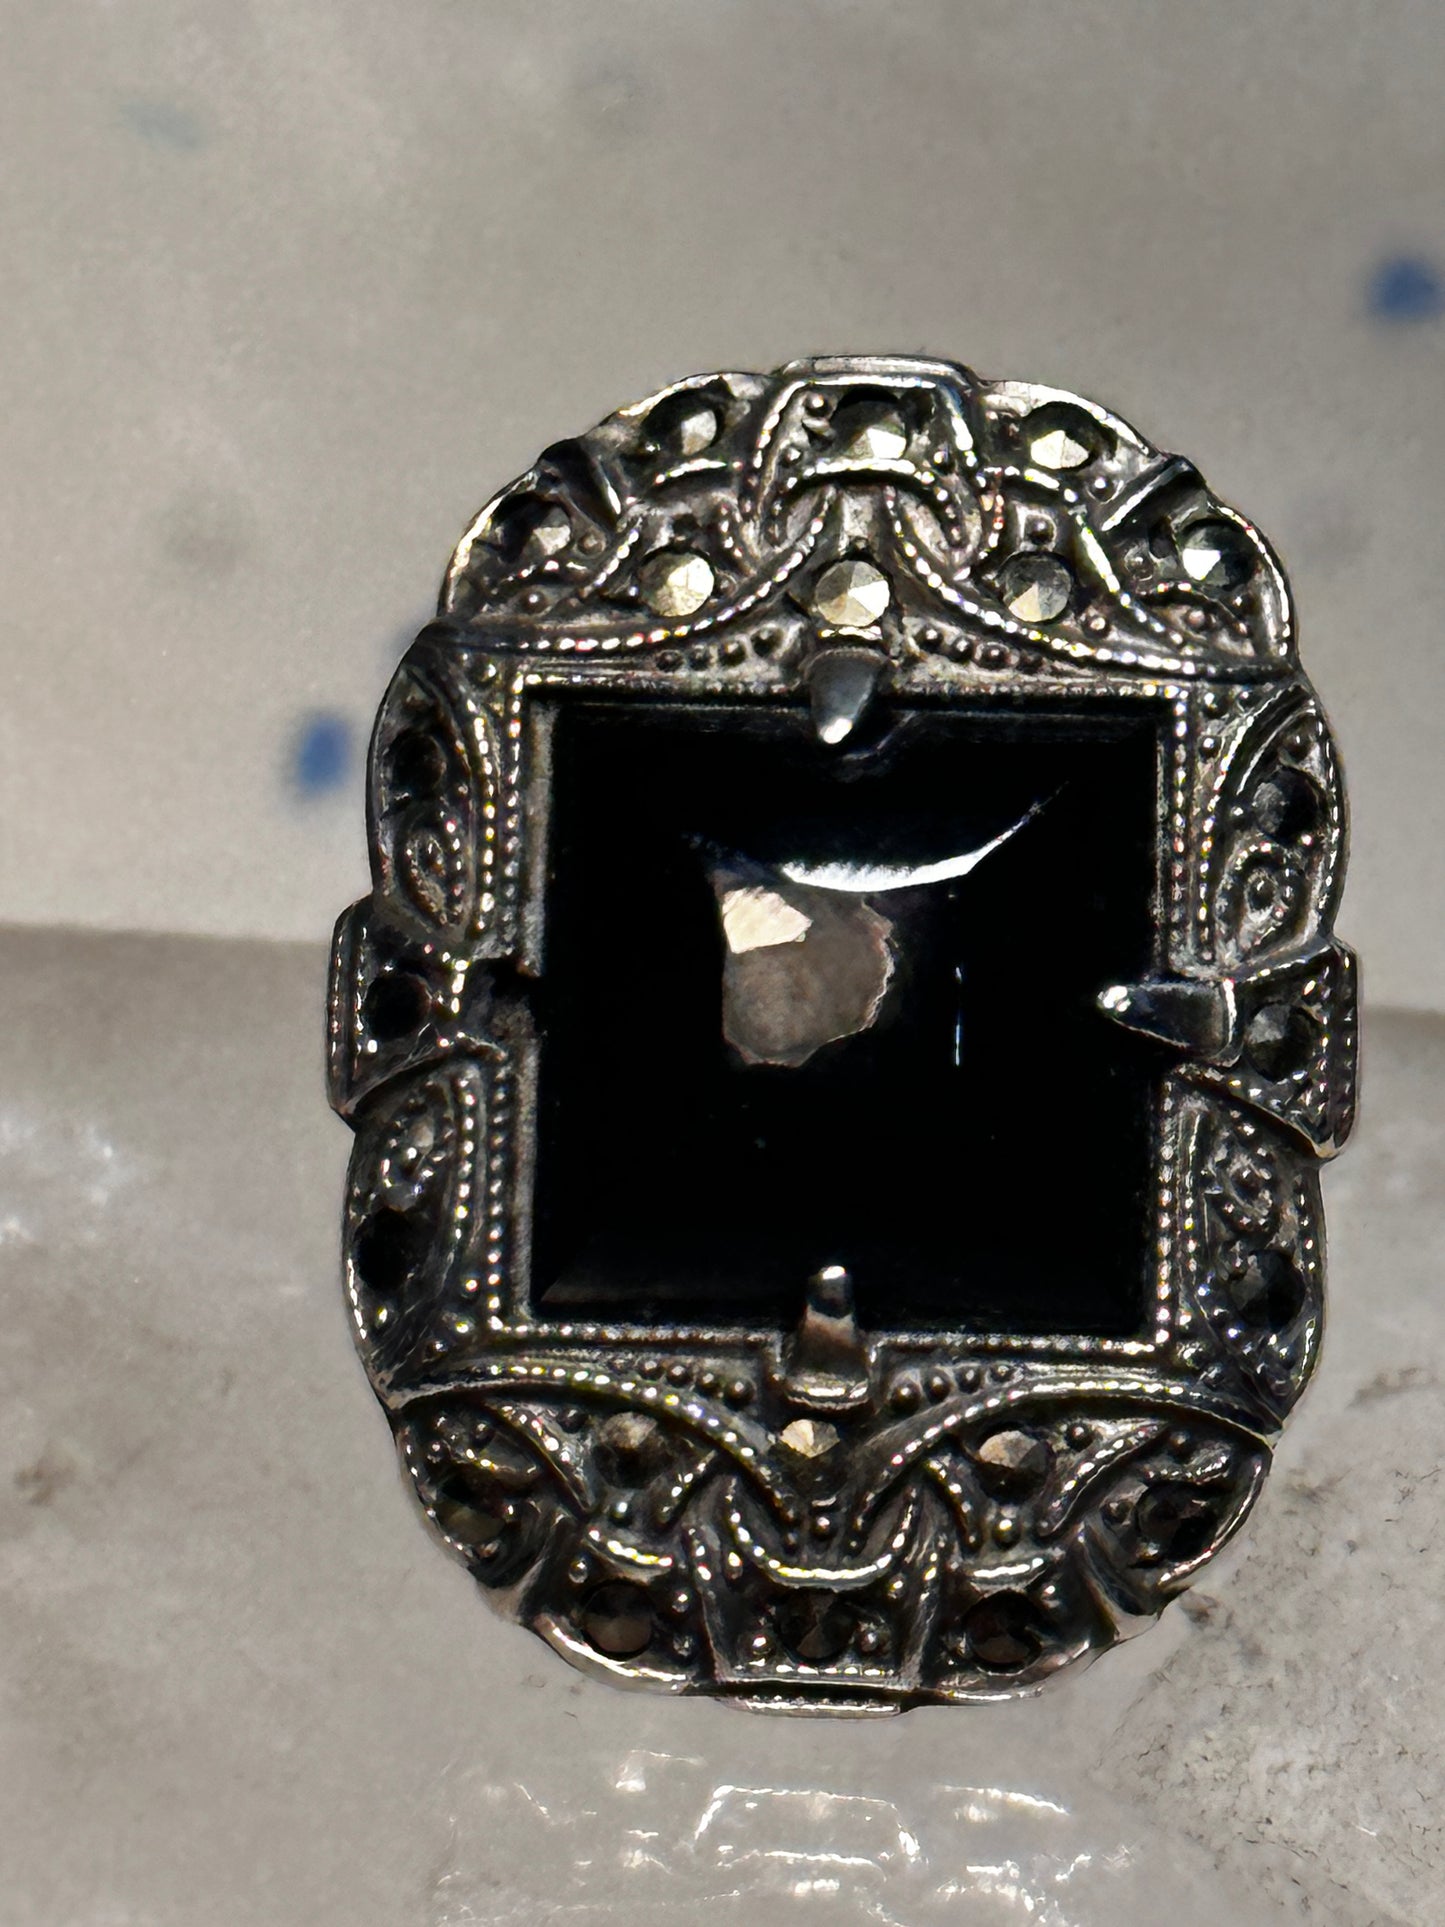 Onyx ring Art Deco size 5.75 mrcasites mourning sterling silver women